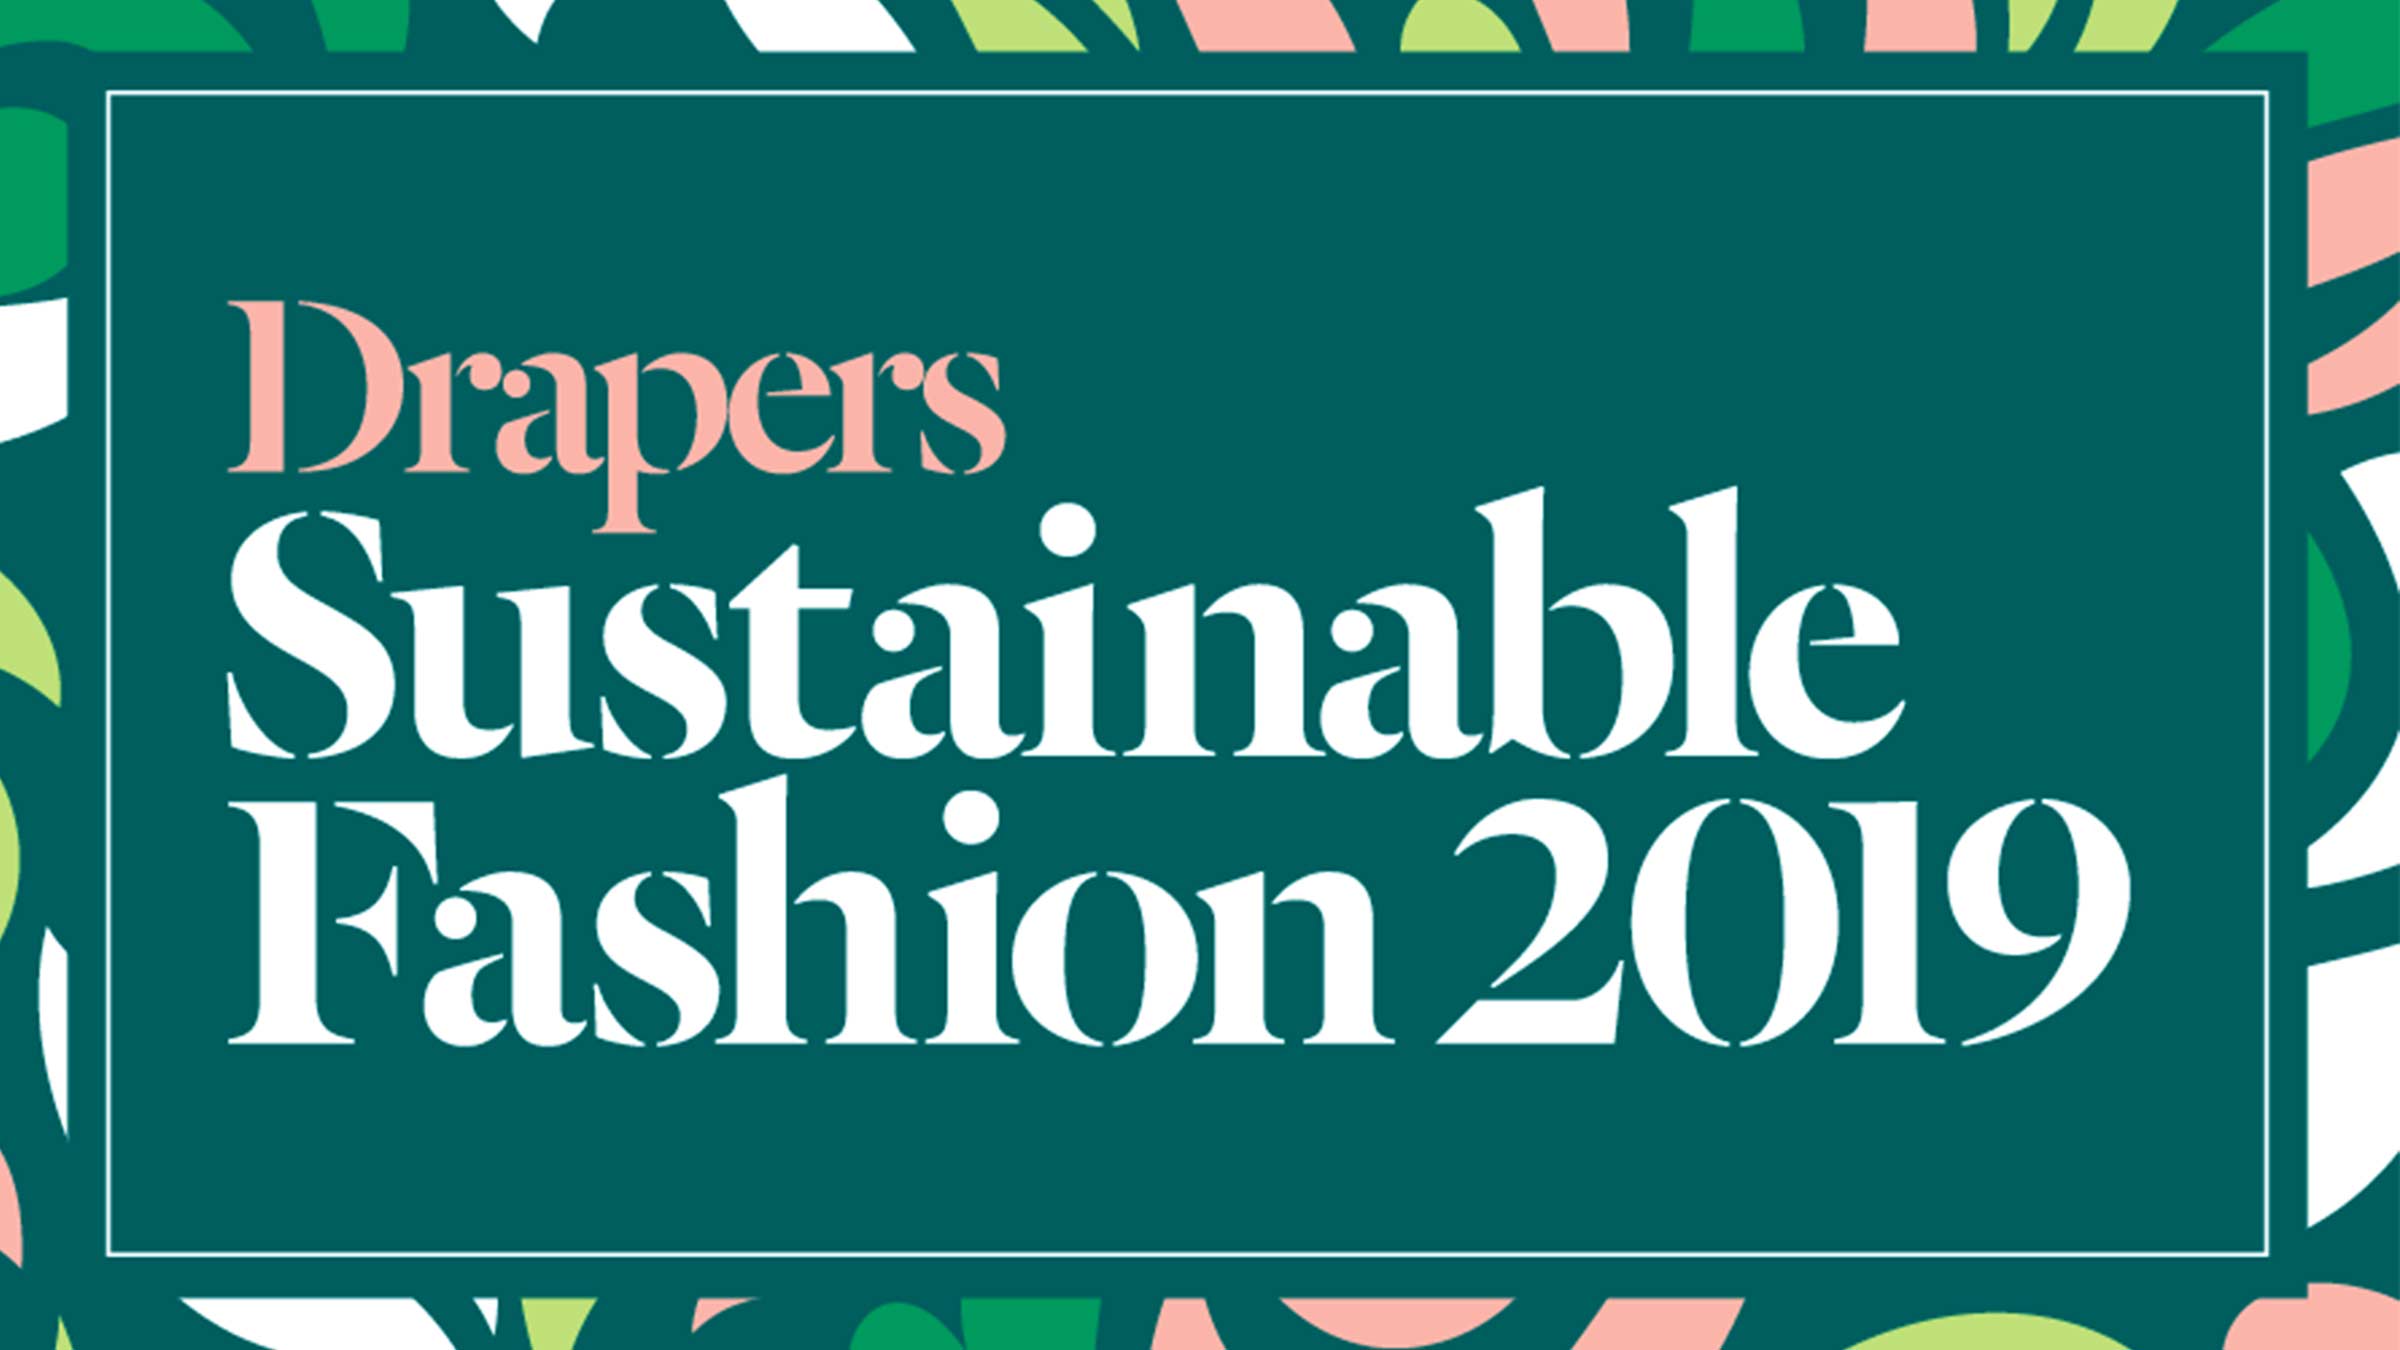 Drapers Sustainable Fashion conference